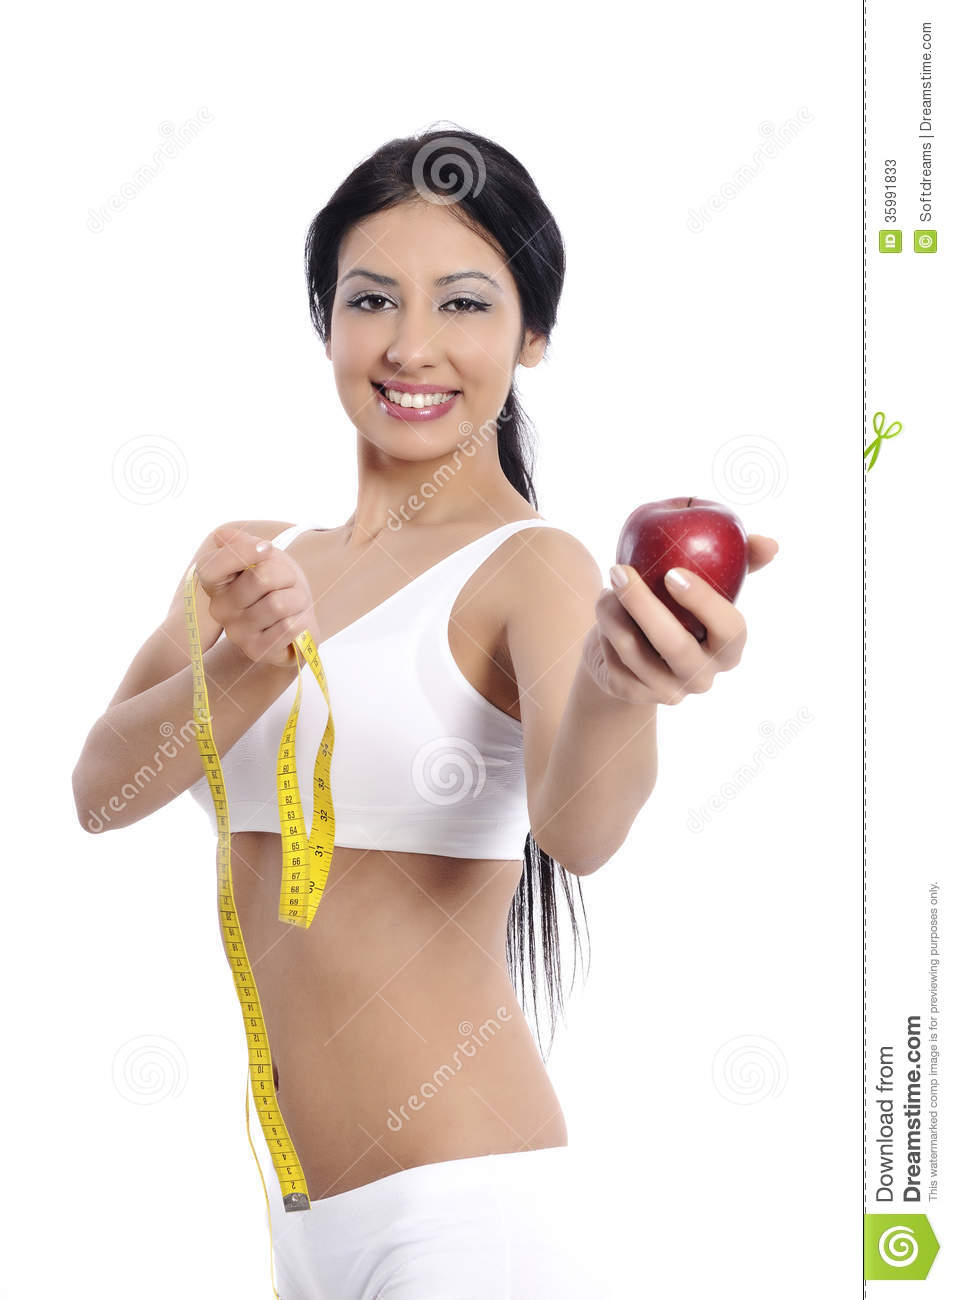 Young Woman Measuring Her Breast With A Measuring Tape Stock Photos